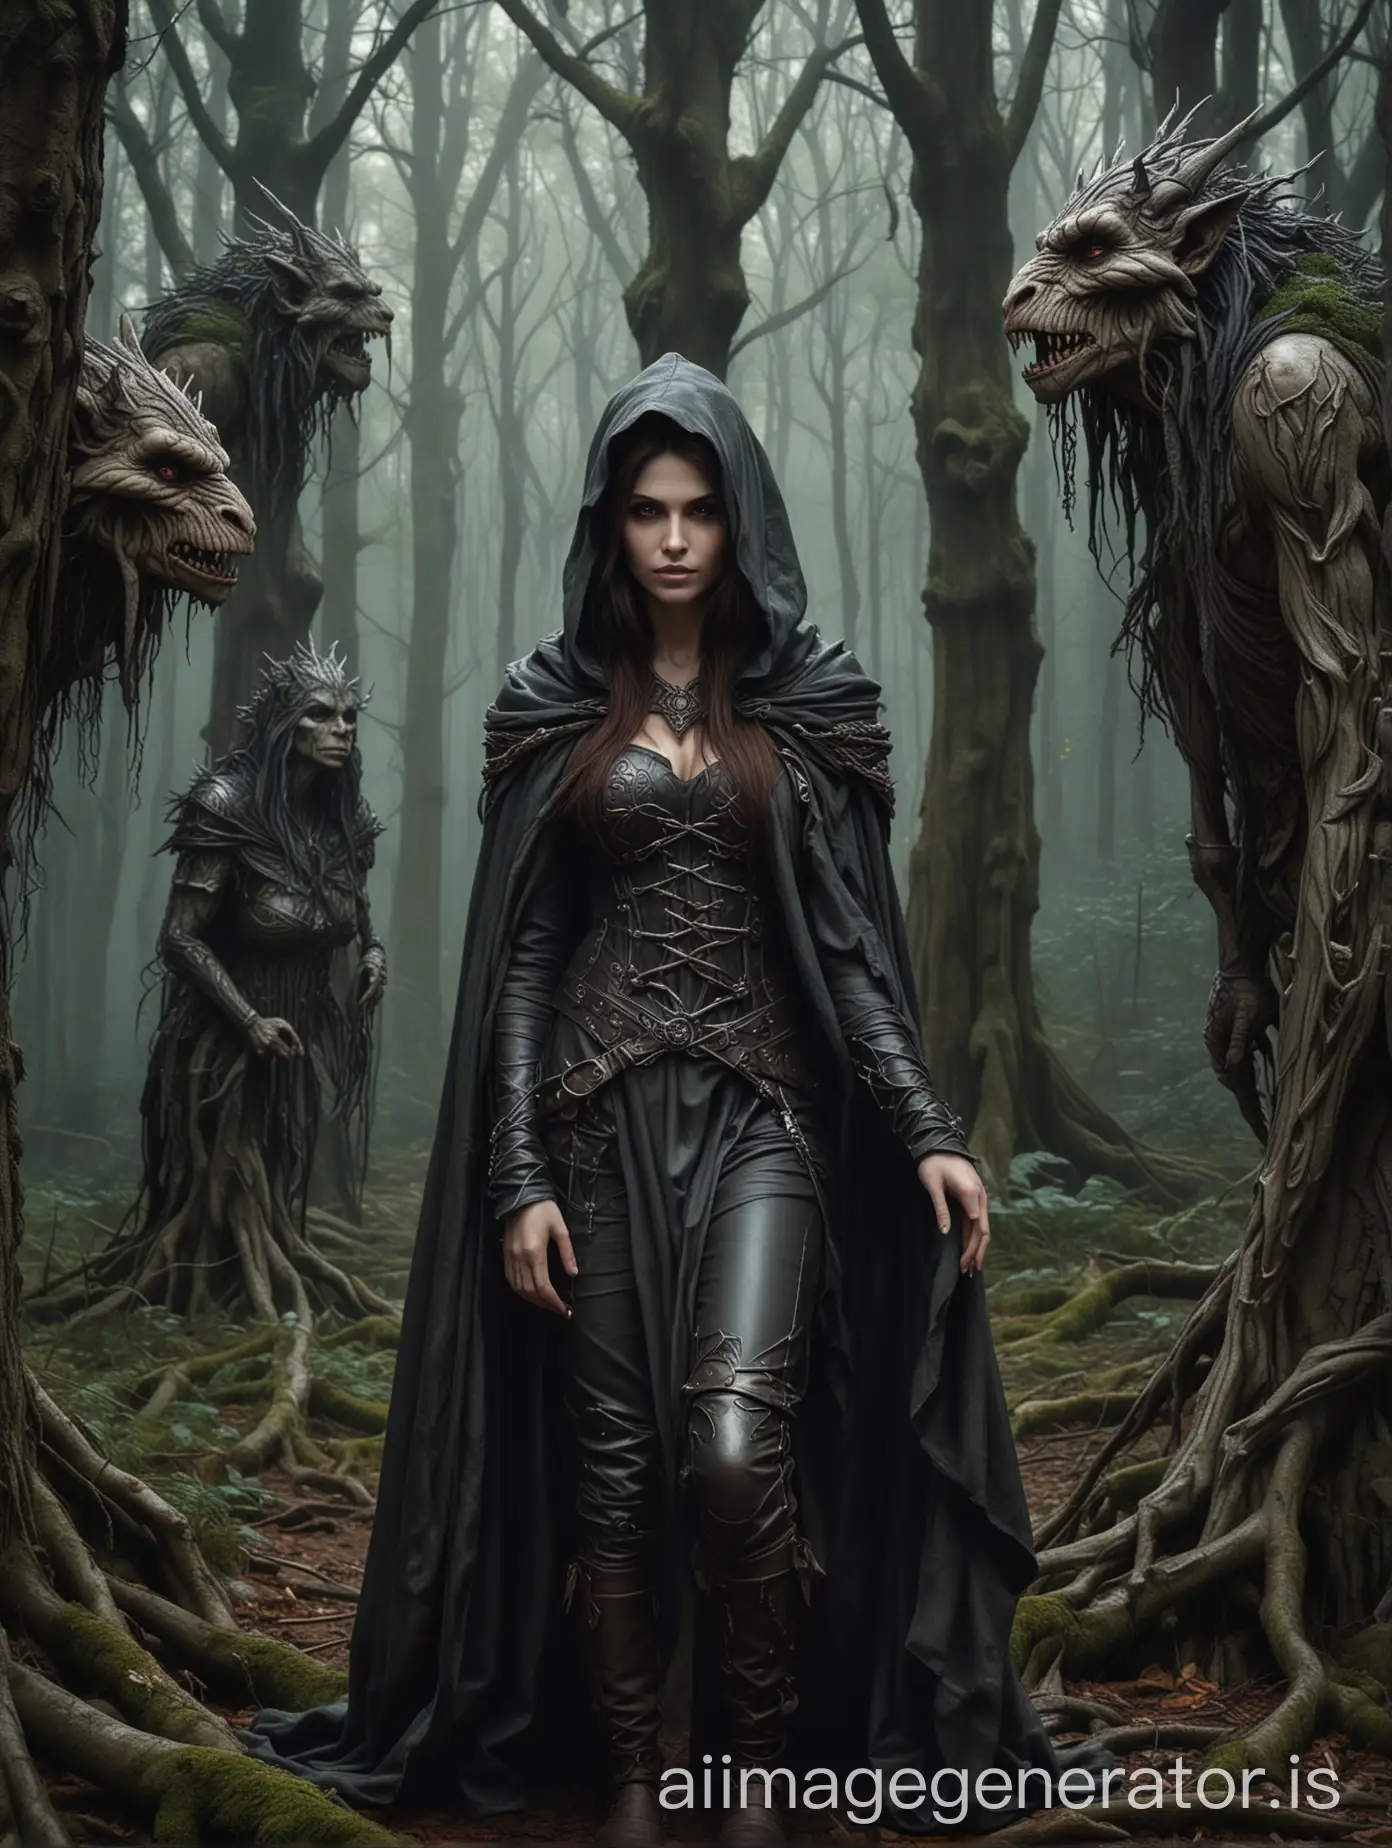 anne stokes art style, woman in medieval hood, hiding in deep woods, crooked trees, huge troll figure in the background, background of dark forest trees